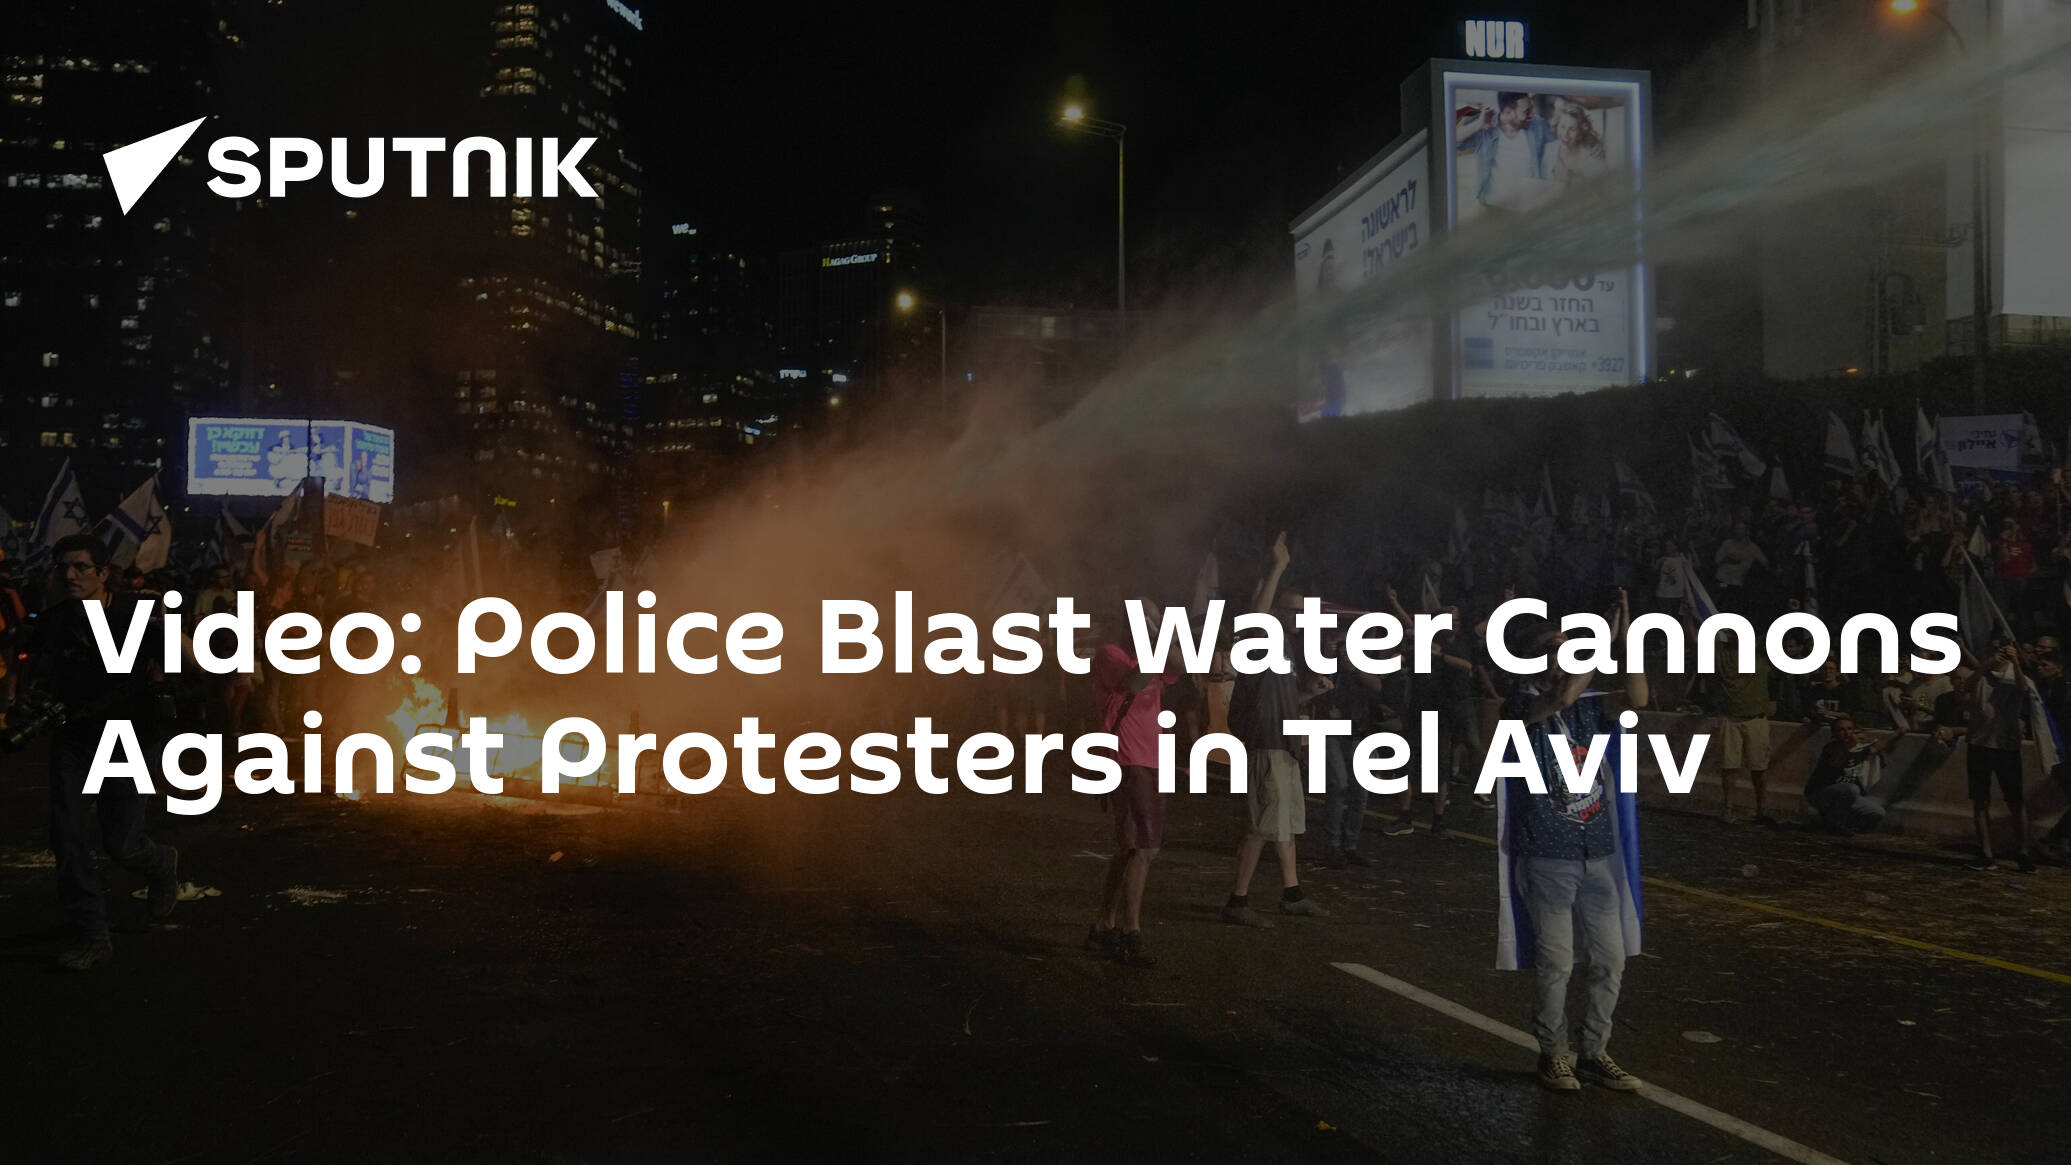 Video: Police Blast Water Cannons Against Protesters in Tel Aviv